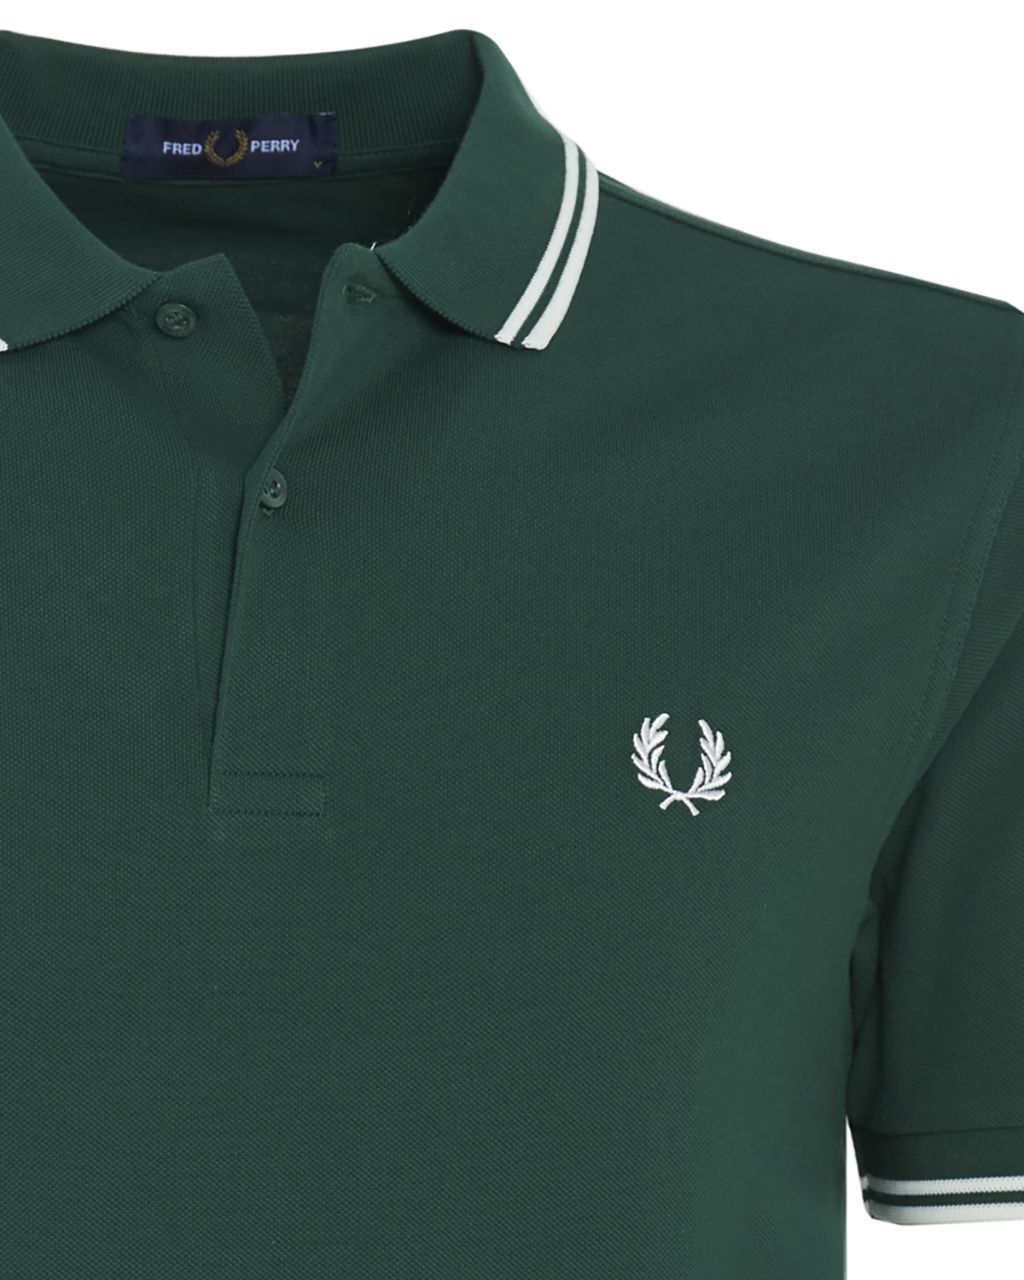 Fred Perry Polo KM Groen 070164-001-L